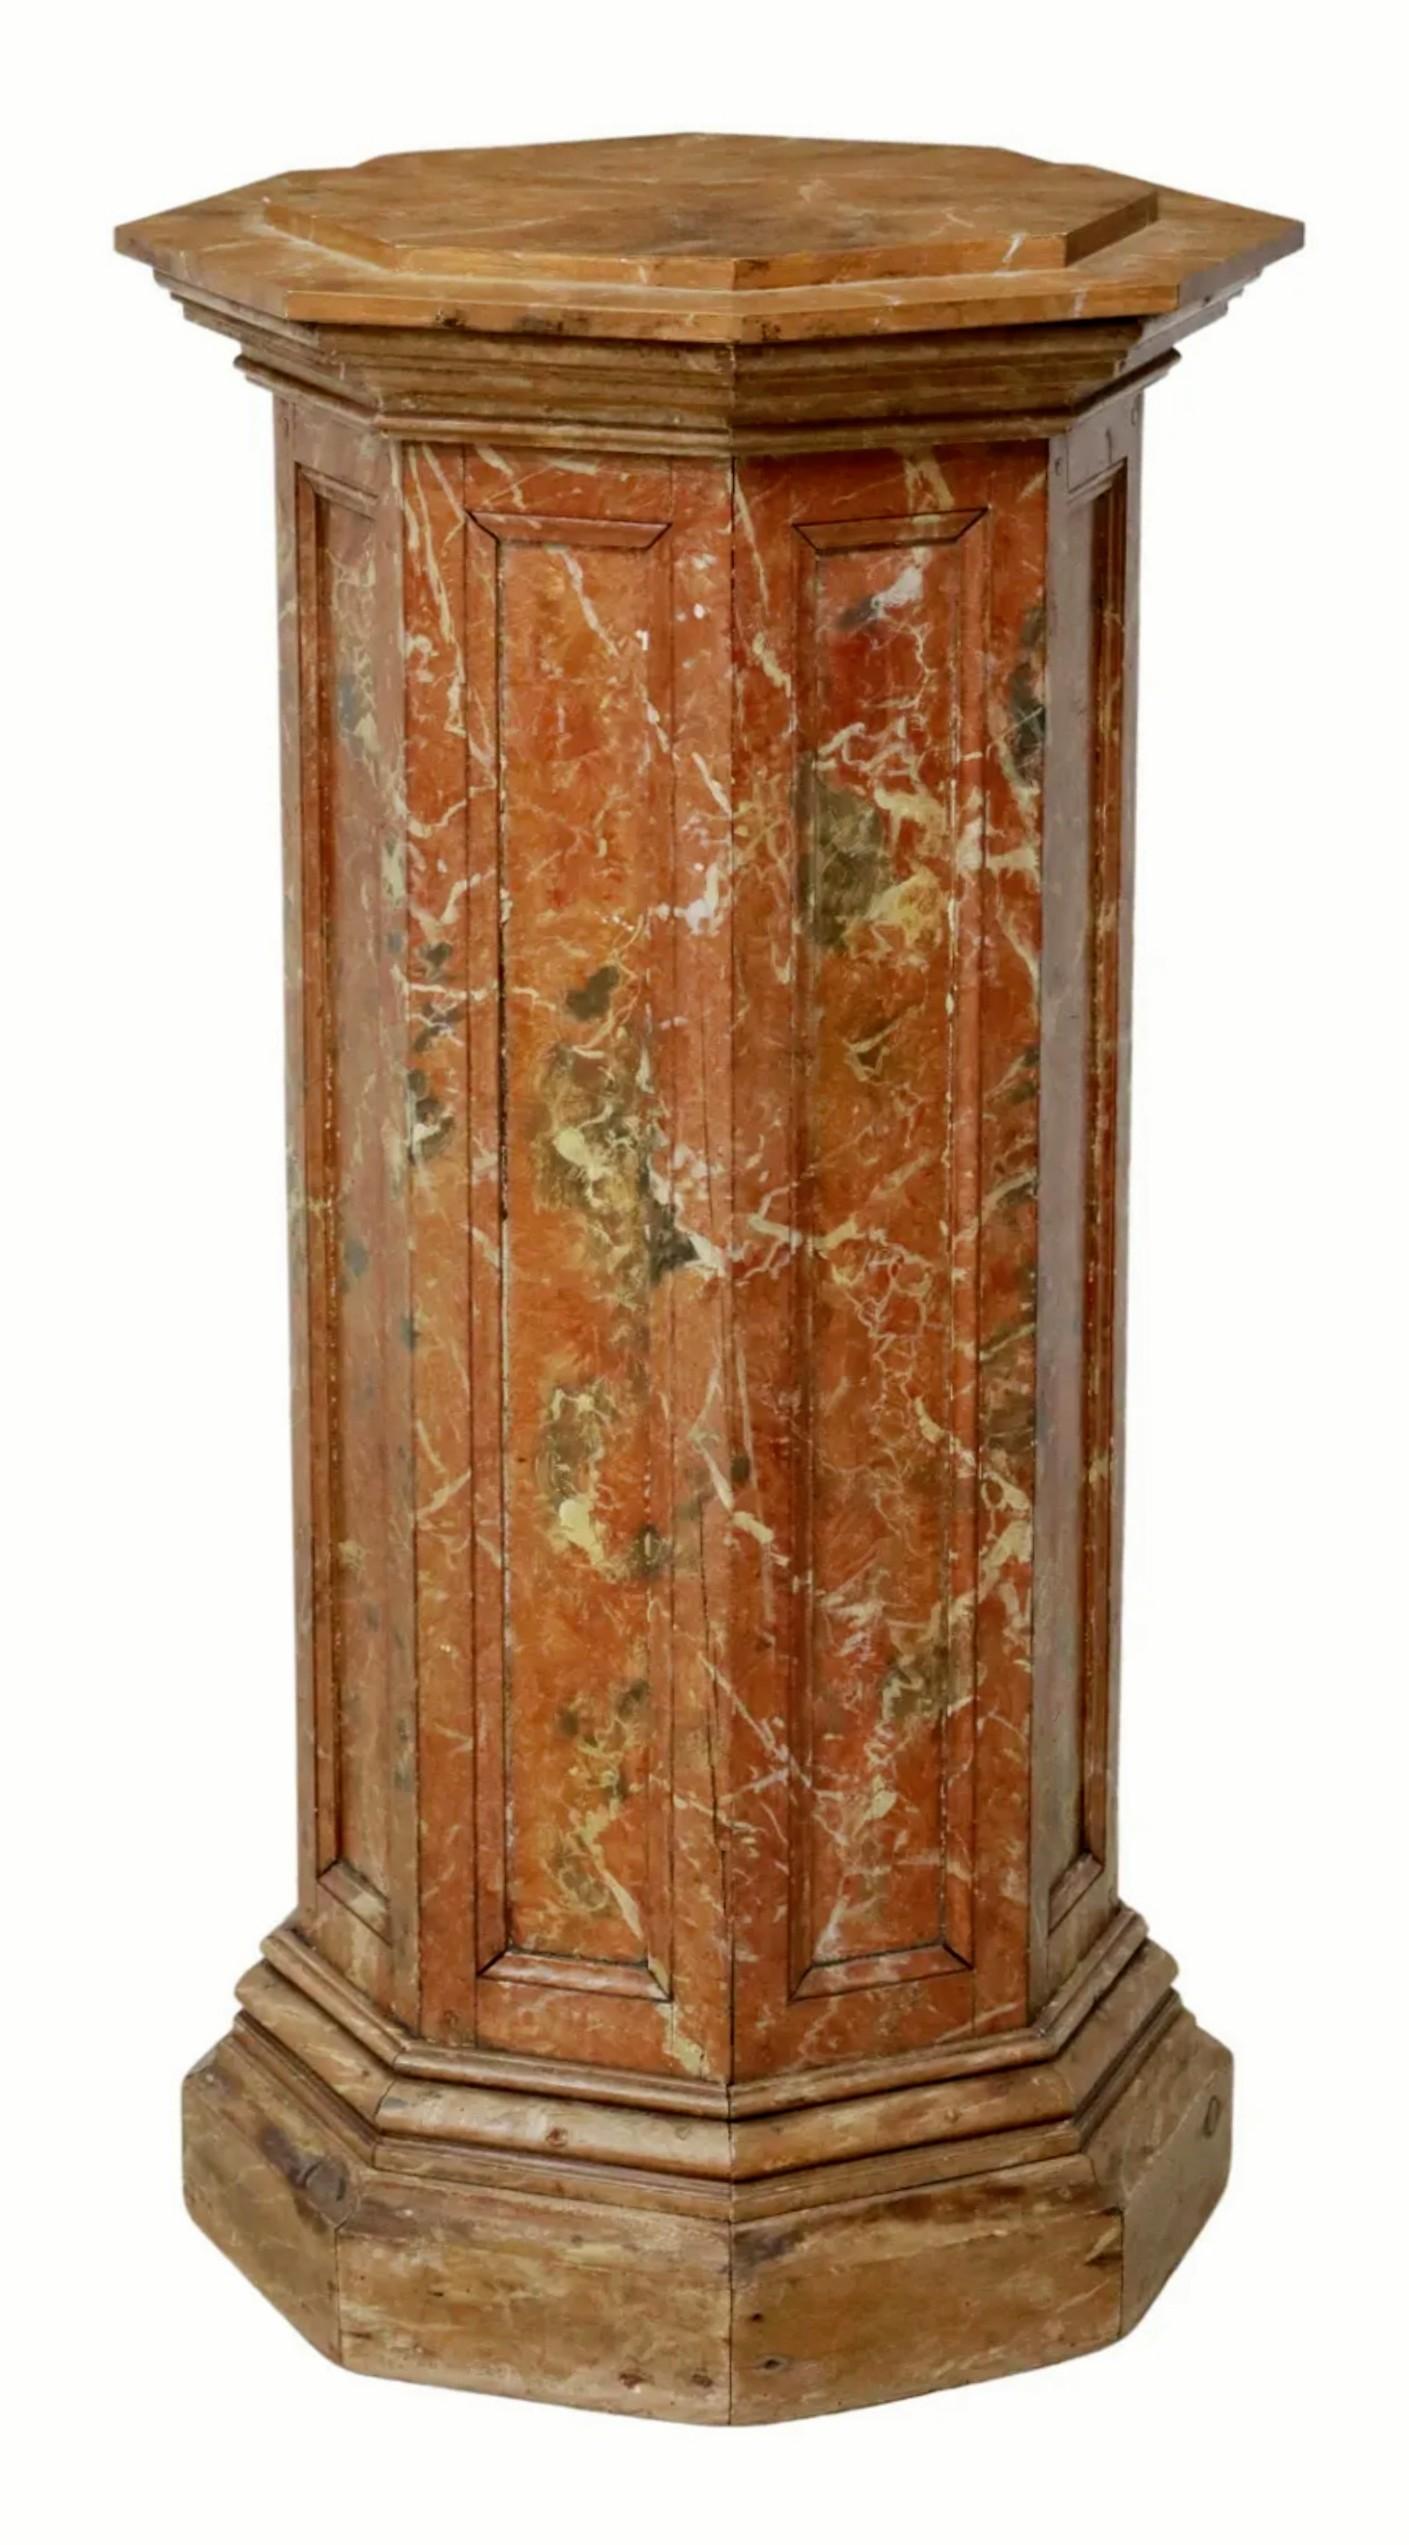 A large antique Italian Neoclassical Revival faux marble painted wooden pedestal - plant stand from the turn of the late 19th / early 20th century.

Octagonal architectural columnar form with paneled sides, hand-crafted of solid pine,